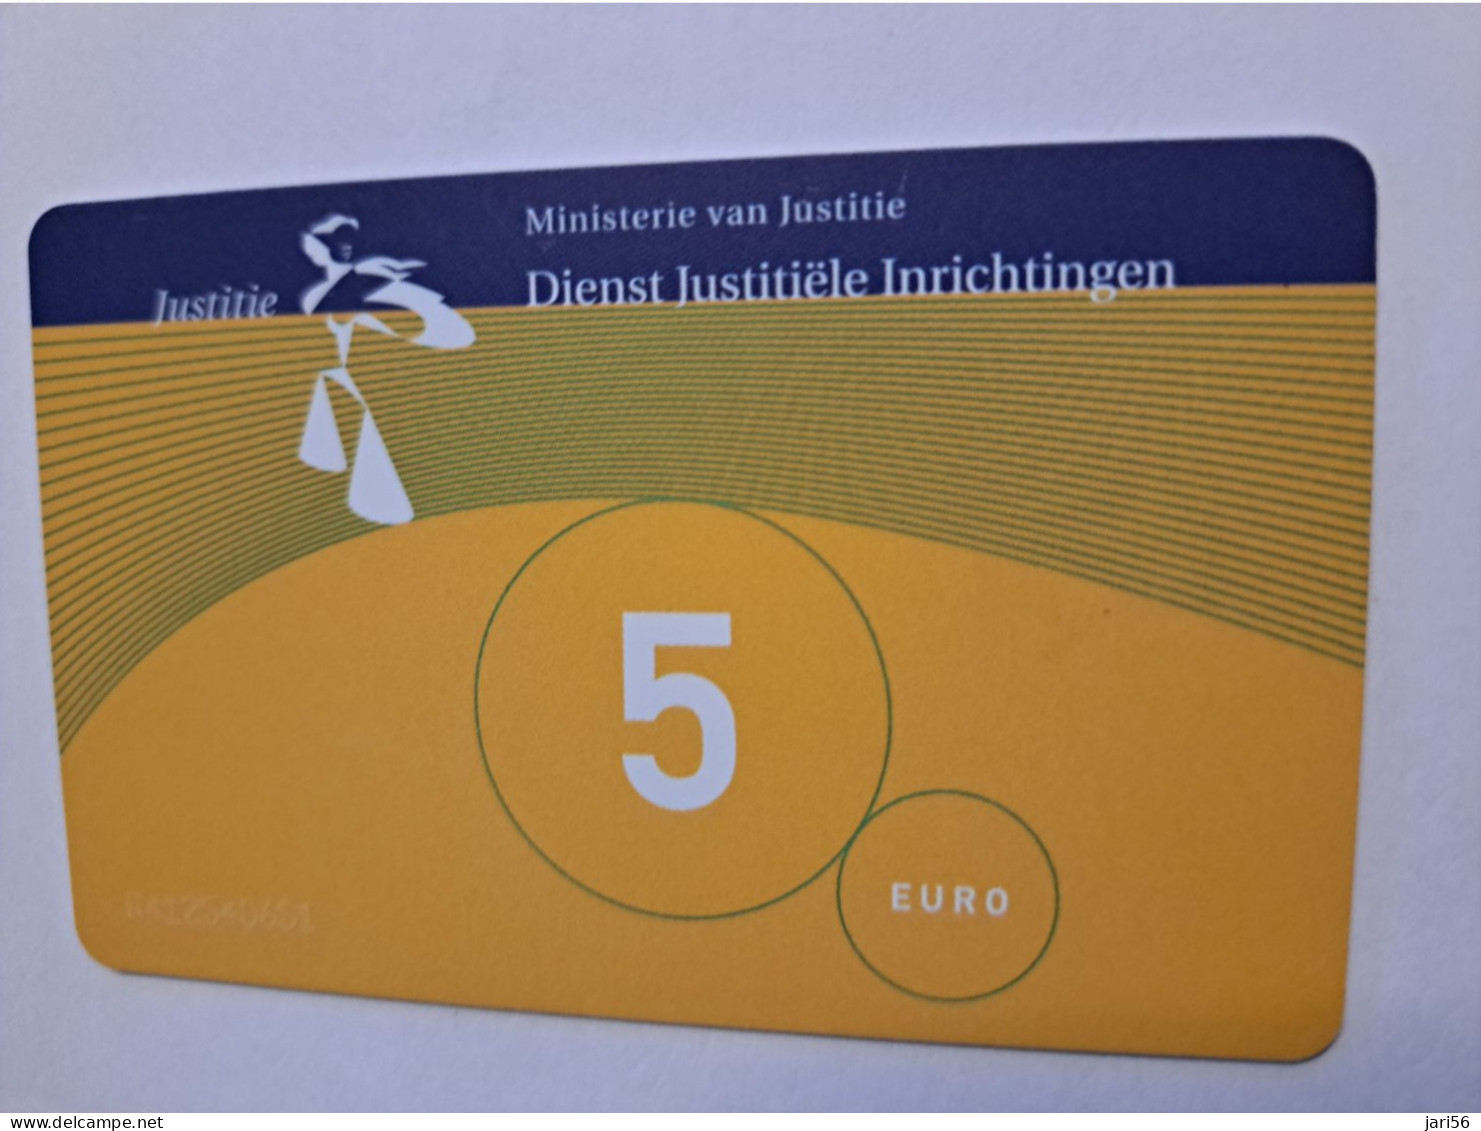 NETHERLANDS   € 5,-  ,-  / USED  / DATE  01-07/08  JUSTITIE/PRISON CARD  CHIP CARD/ USED   ** 16022** - [3] Sim Cards, Prepaid & Refills